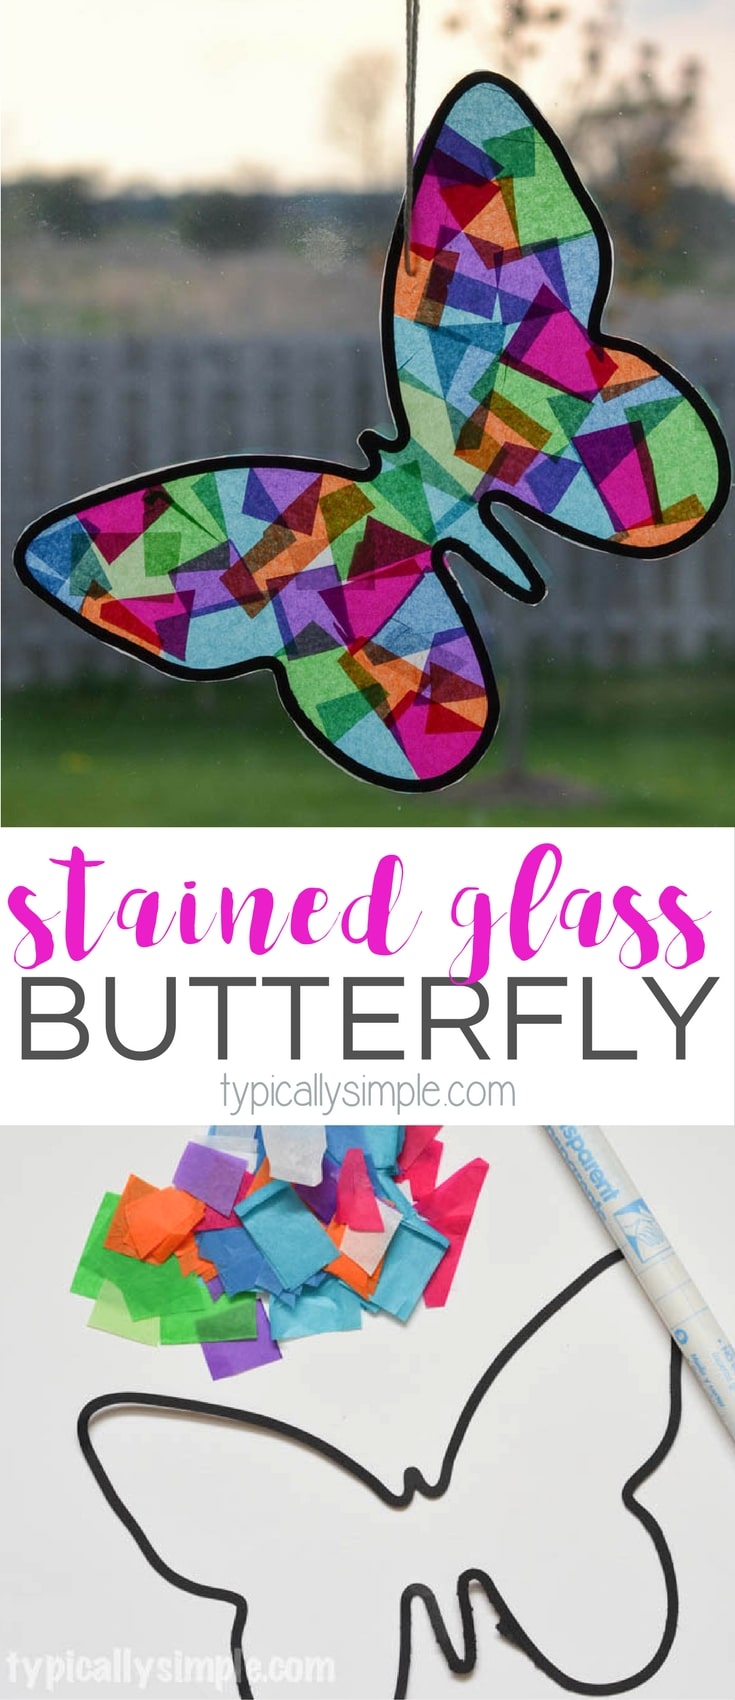 Drejning spil Brokke sig Stained Glass Butterfly Craft - Typically Simple